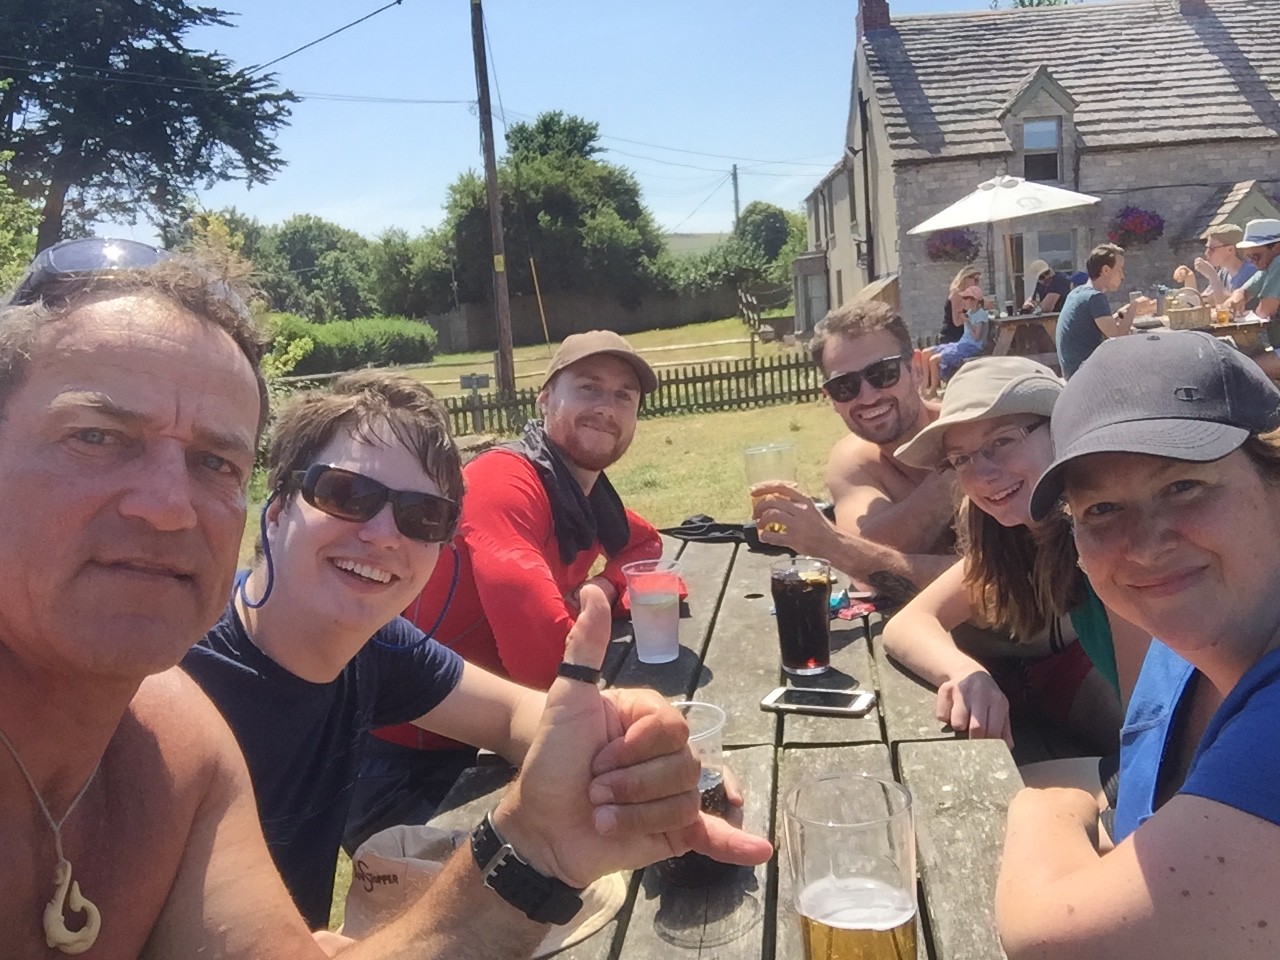 Happy times paddling in Dorset with food at the Bankes Arms Pub.